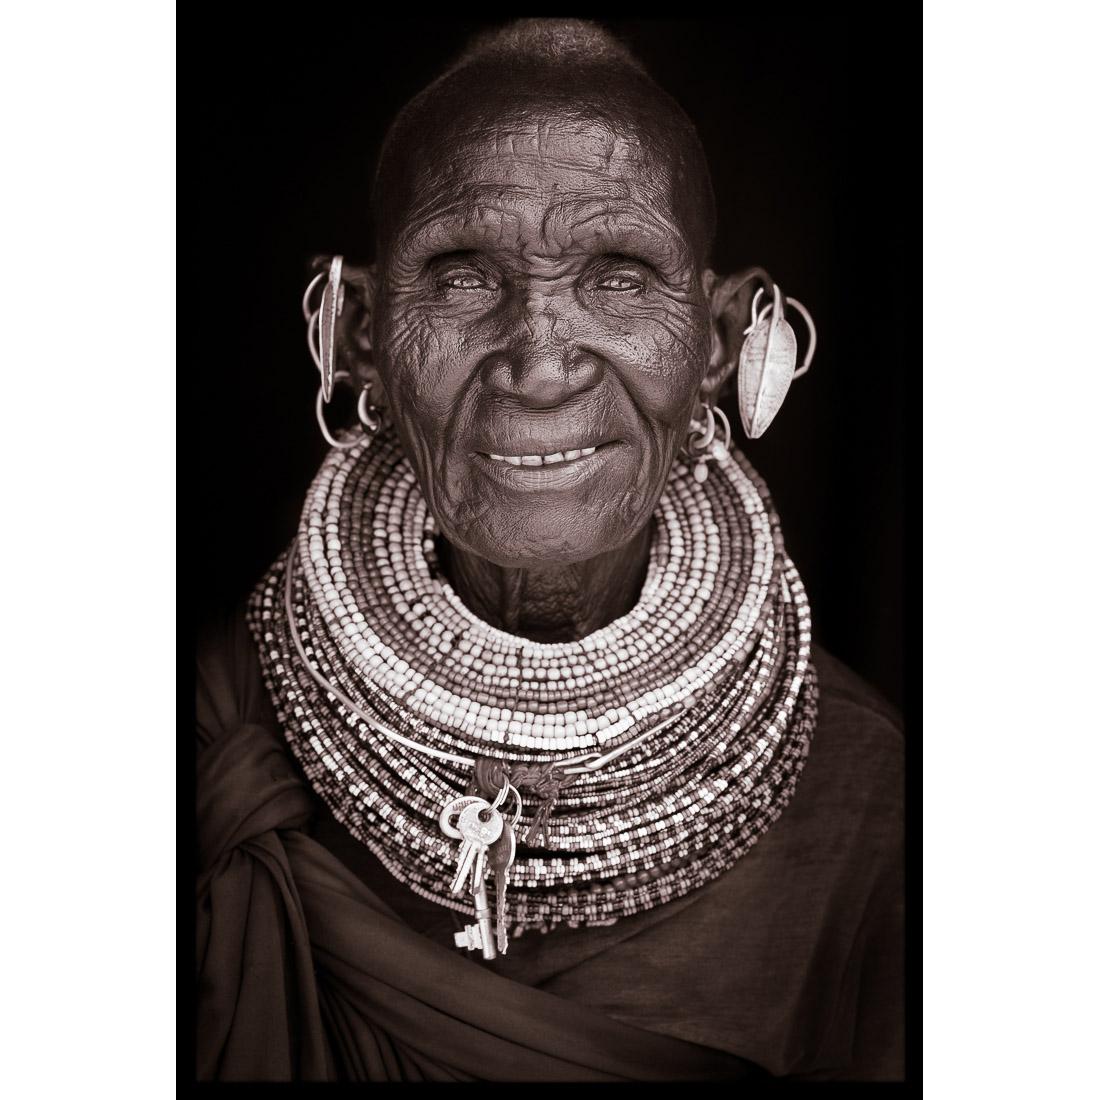 A portrait of Nganamya, a Turkana woman from northern Kenya in 2019.

John Kenny’s work is all shot on location in some of the remotest corners of Africa. His images are all taken with natural light and his subjects in their day to day attire.

The